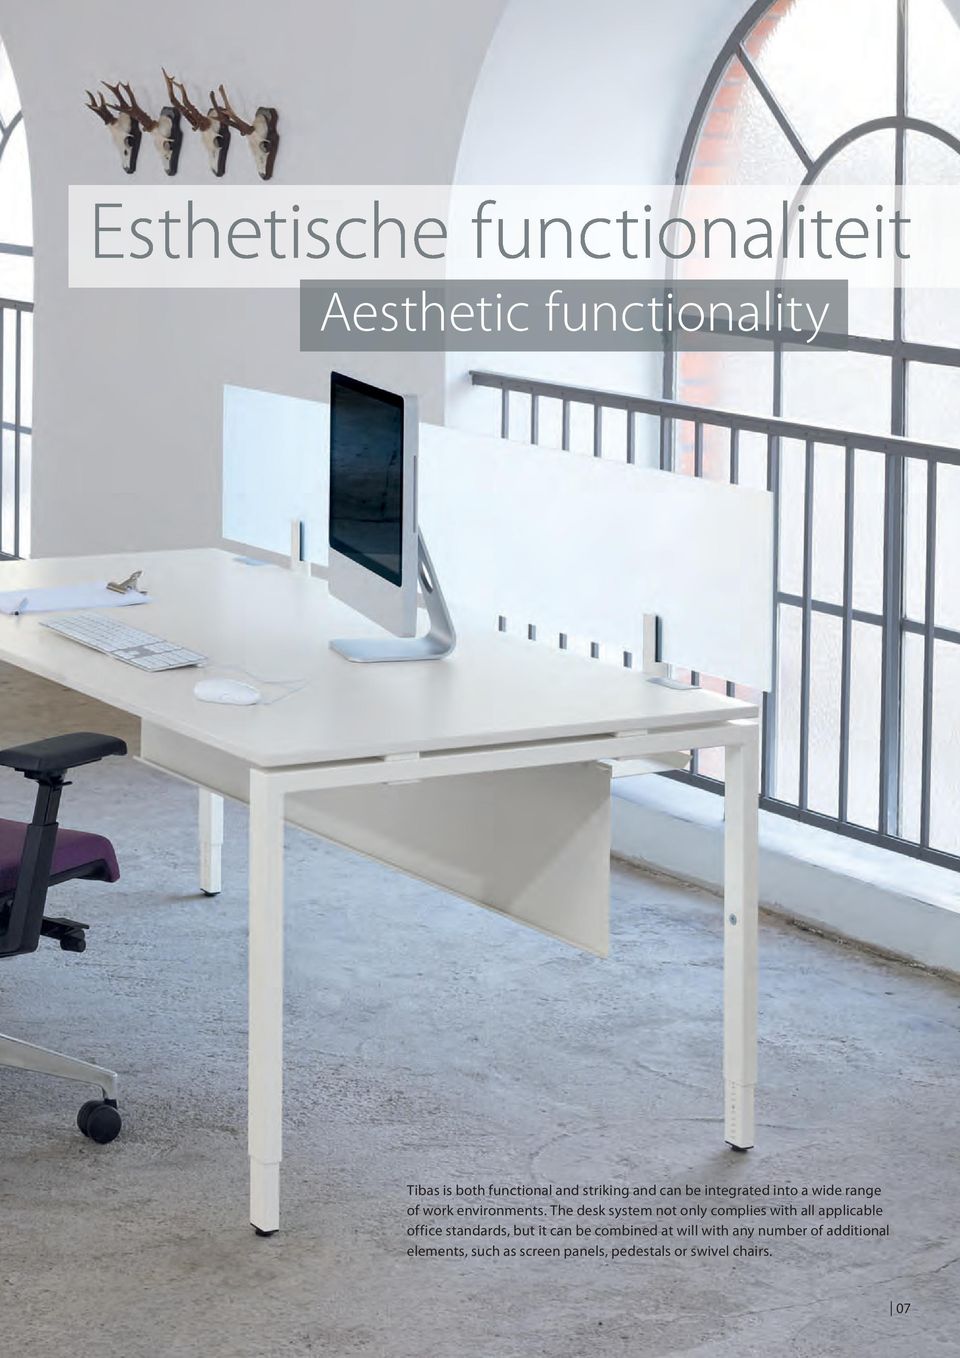 The desk system not only complies with all applicable office standards, but it